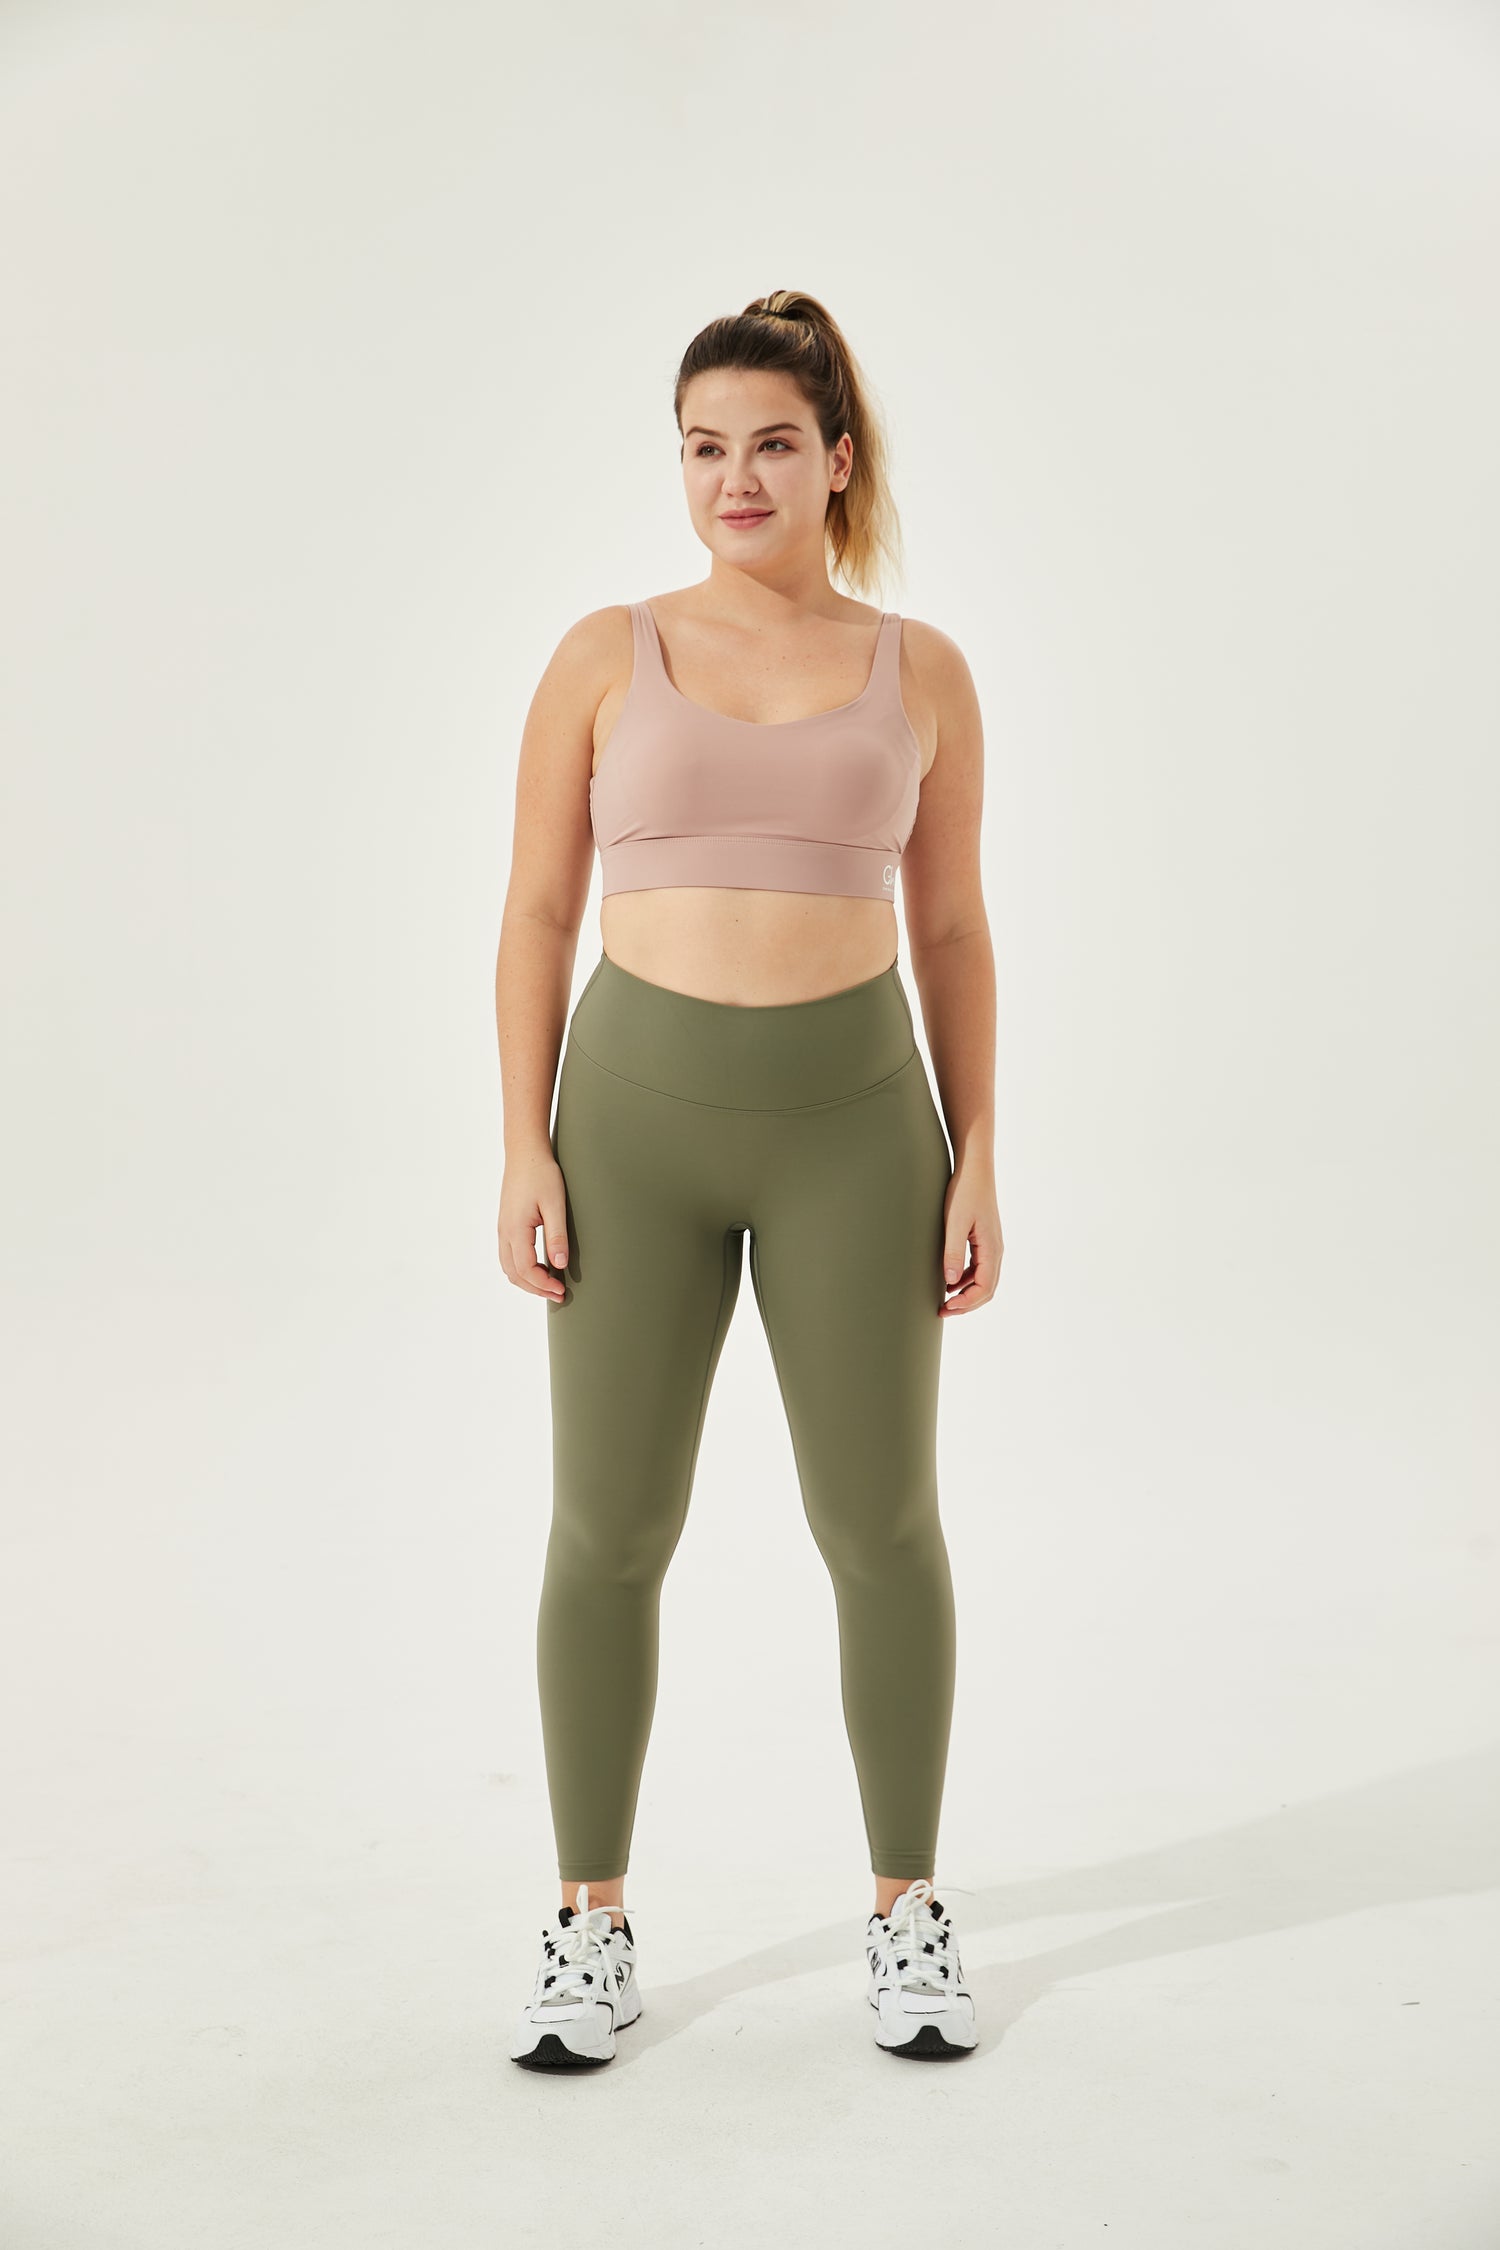 Leggings and Bottoms in Buttery Smooth Fabrics for Your Every Move – Wear  One's At